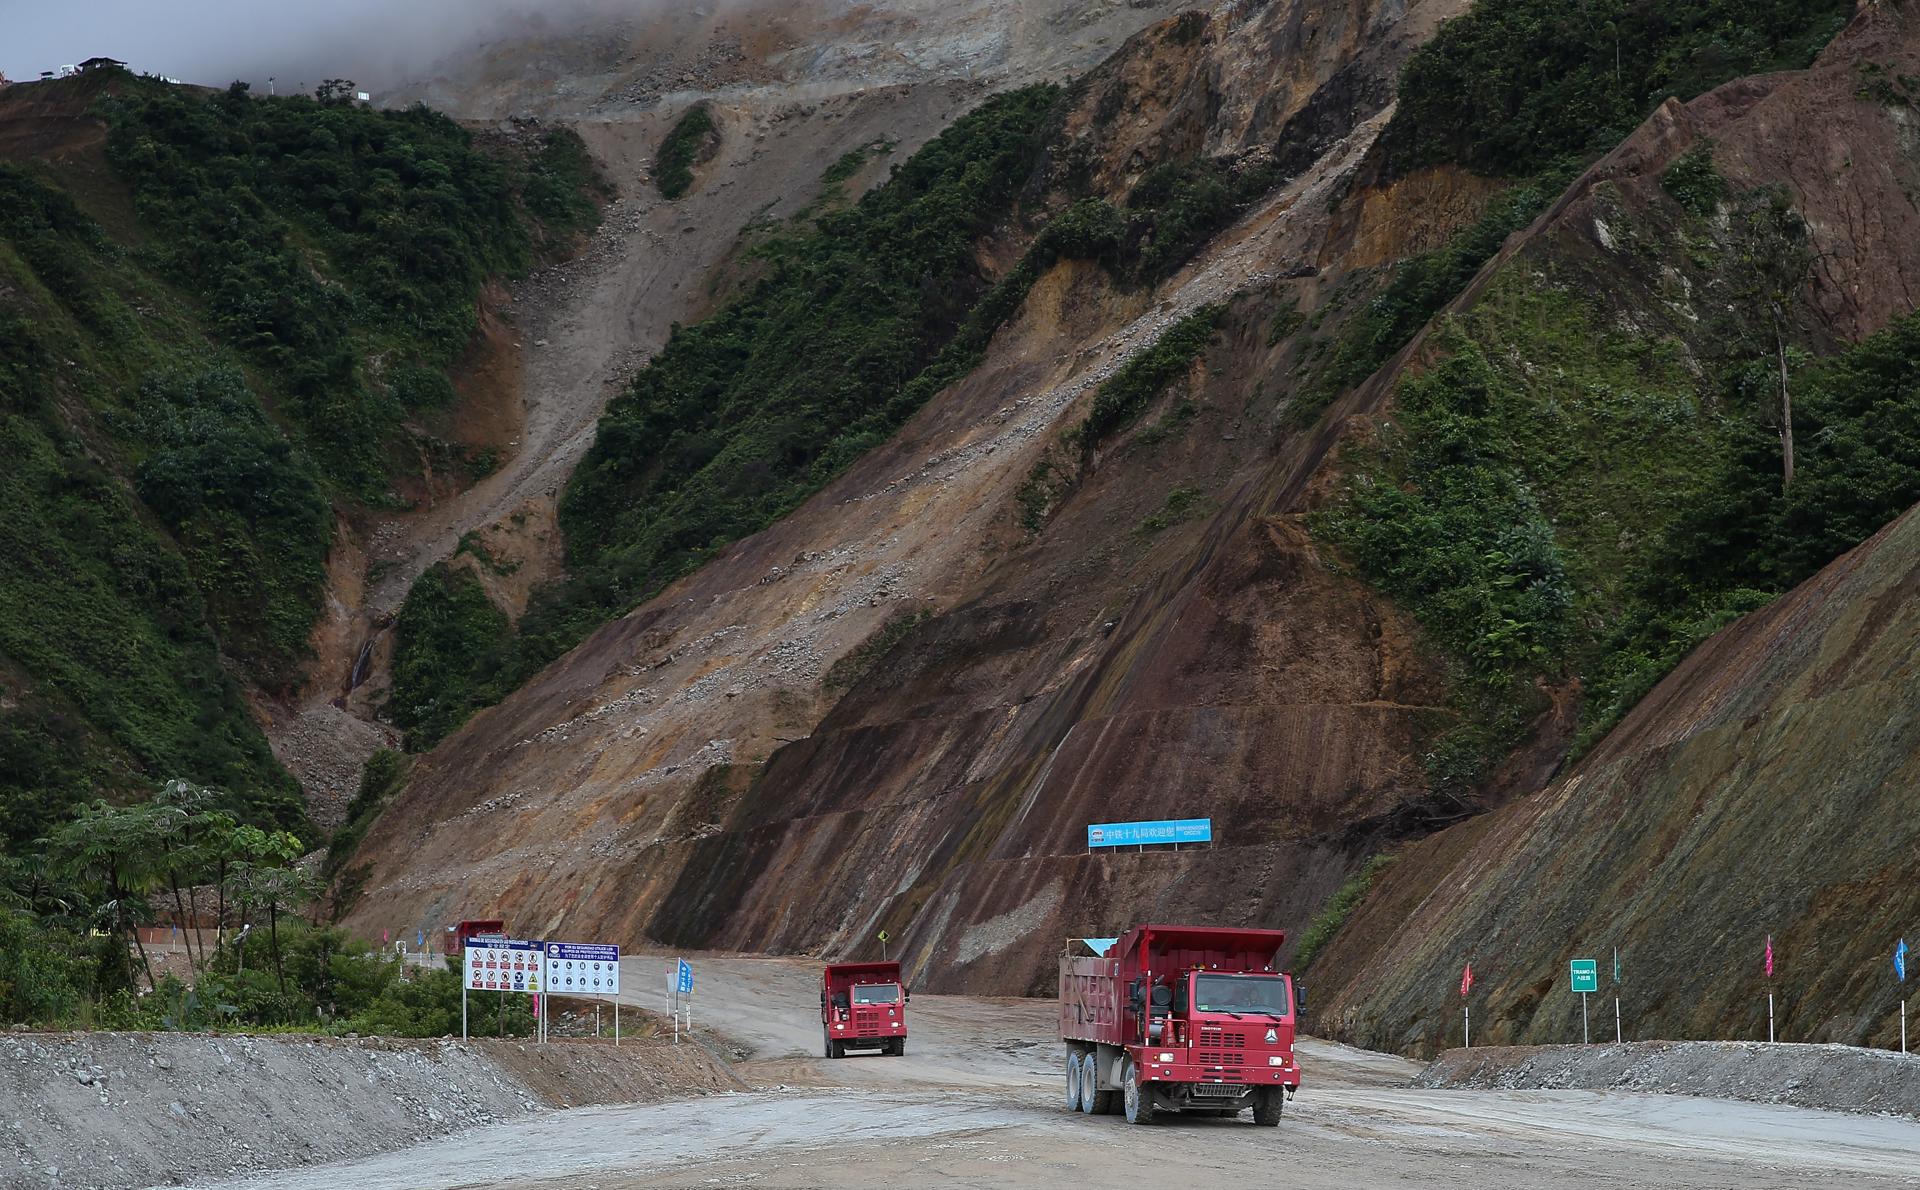 (FILE) View of a processing plant this on July 18, 2019 in Tundayme (Ecuador). Ecuador began its megamining with the beginning of the extraction of copper concentrate at the Cóndor-Mirador mine, located in the Tundayme sector, in the southeast of the country's Amazon, near the border with Peru. EFE/José Jácome